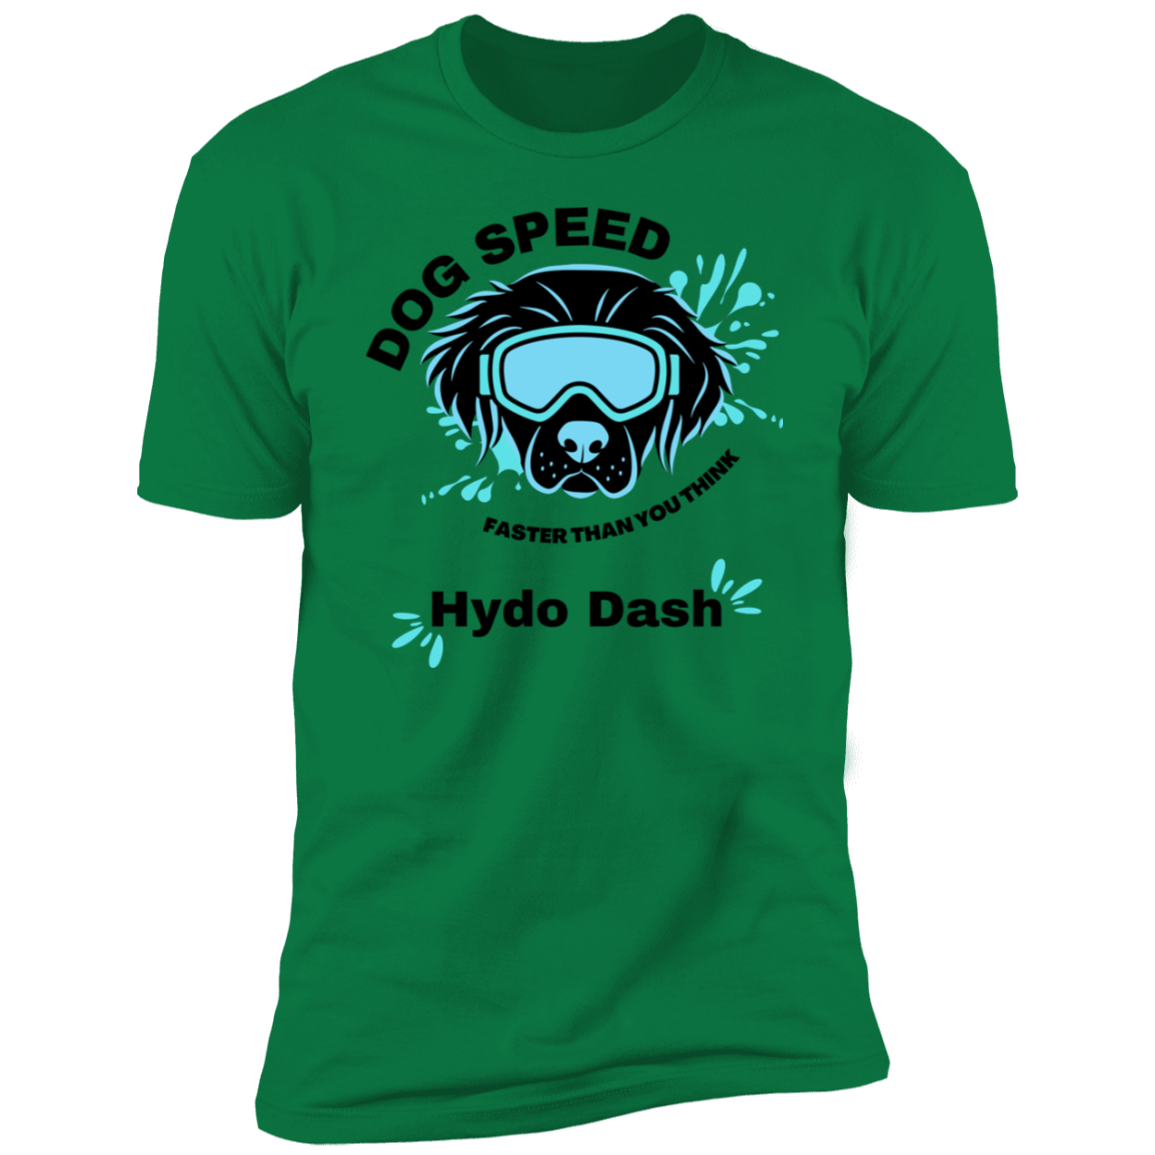 Dog Speed Faster Than You Think Hydro Dash T-shirt, Hydro Dash shirt dog shirt for humans, in kelly green